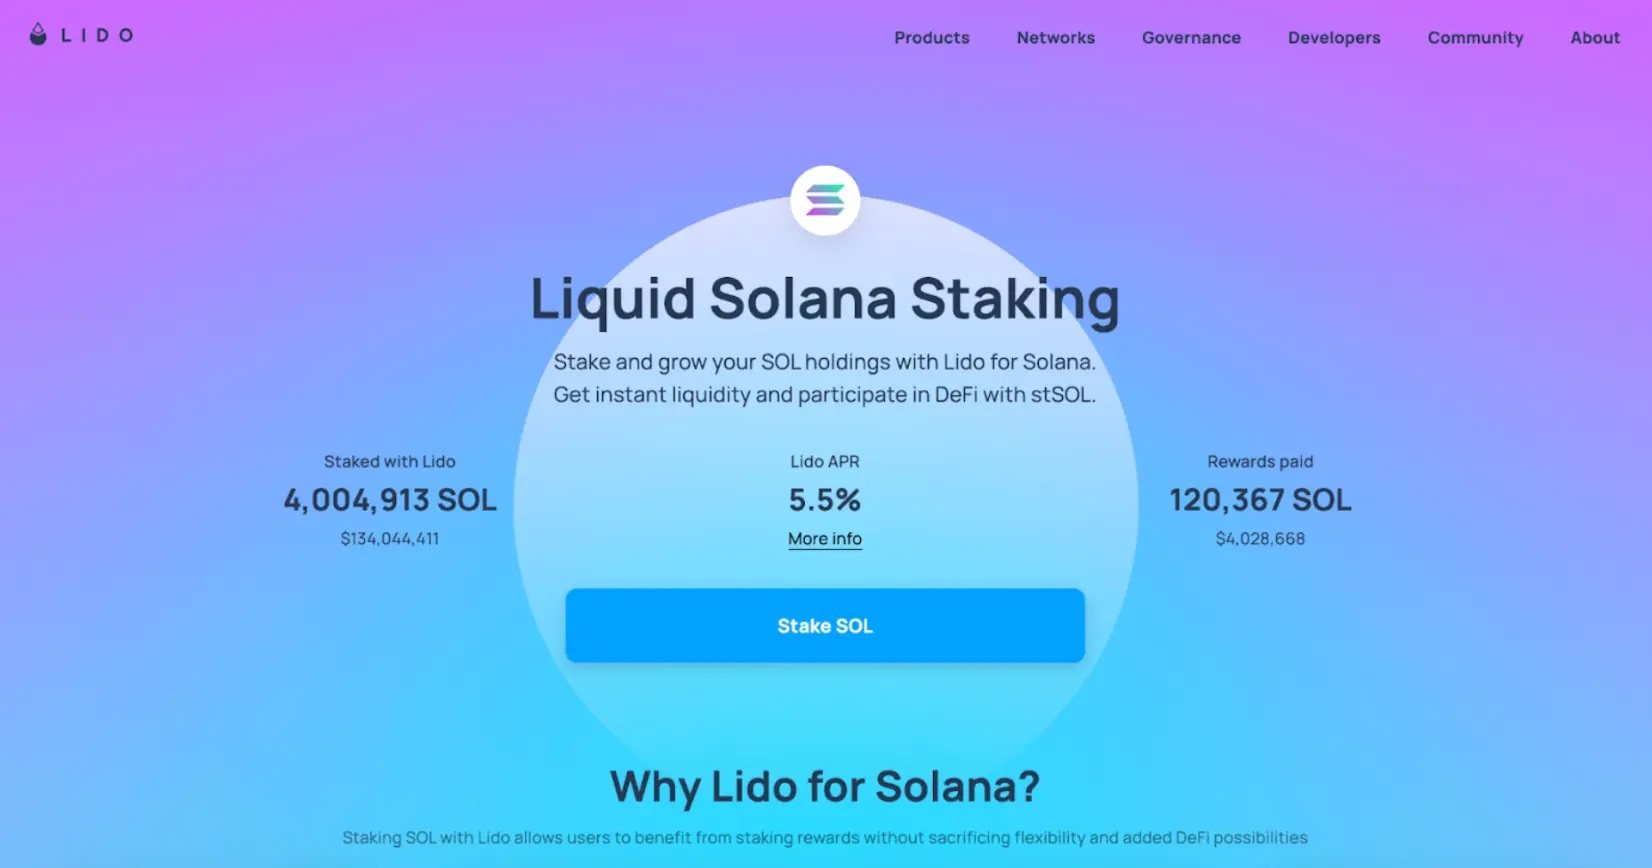 Staking SOL on Lido